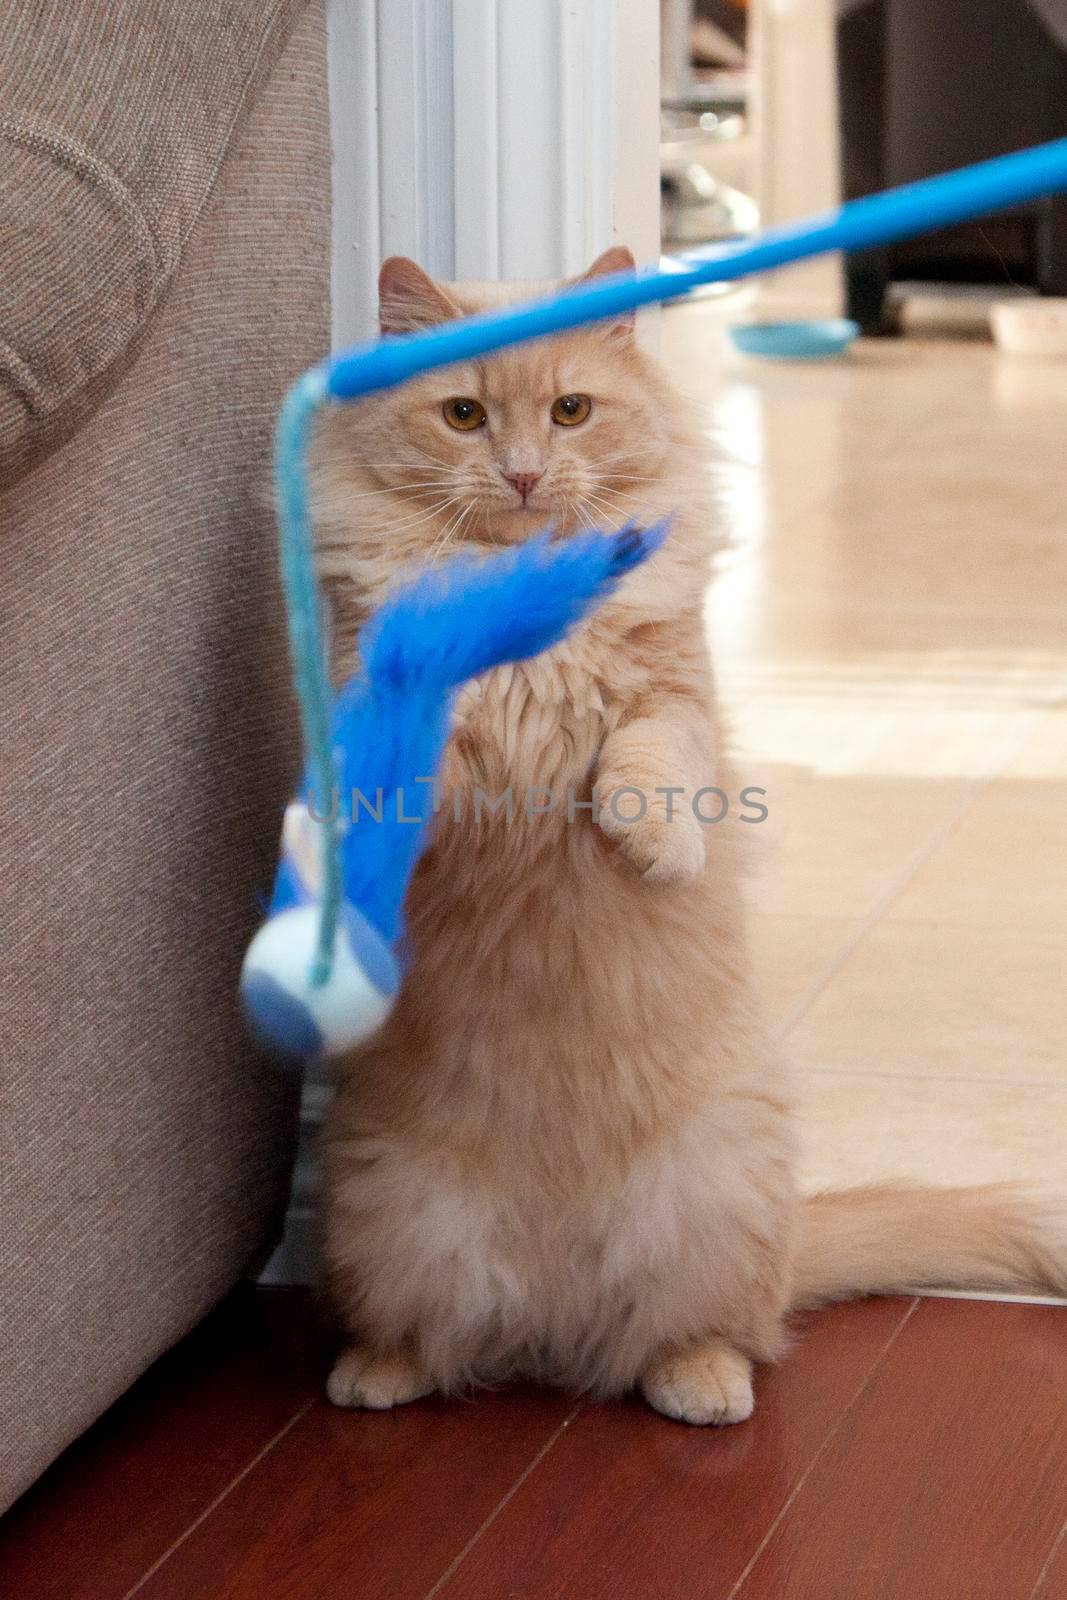 Cat stands on hind legs looking at a blue feather ball toy, ready to pounce